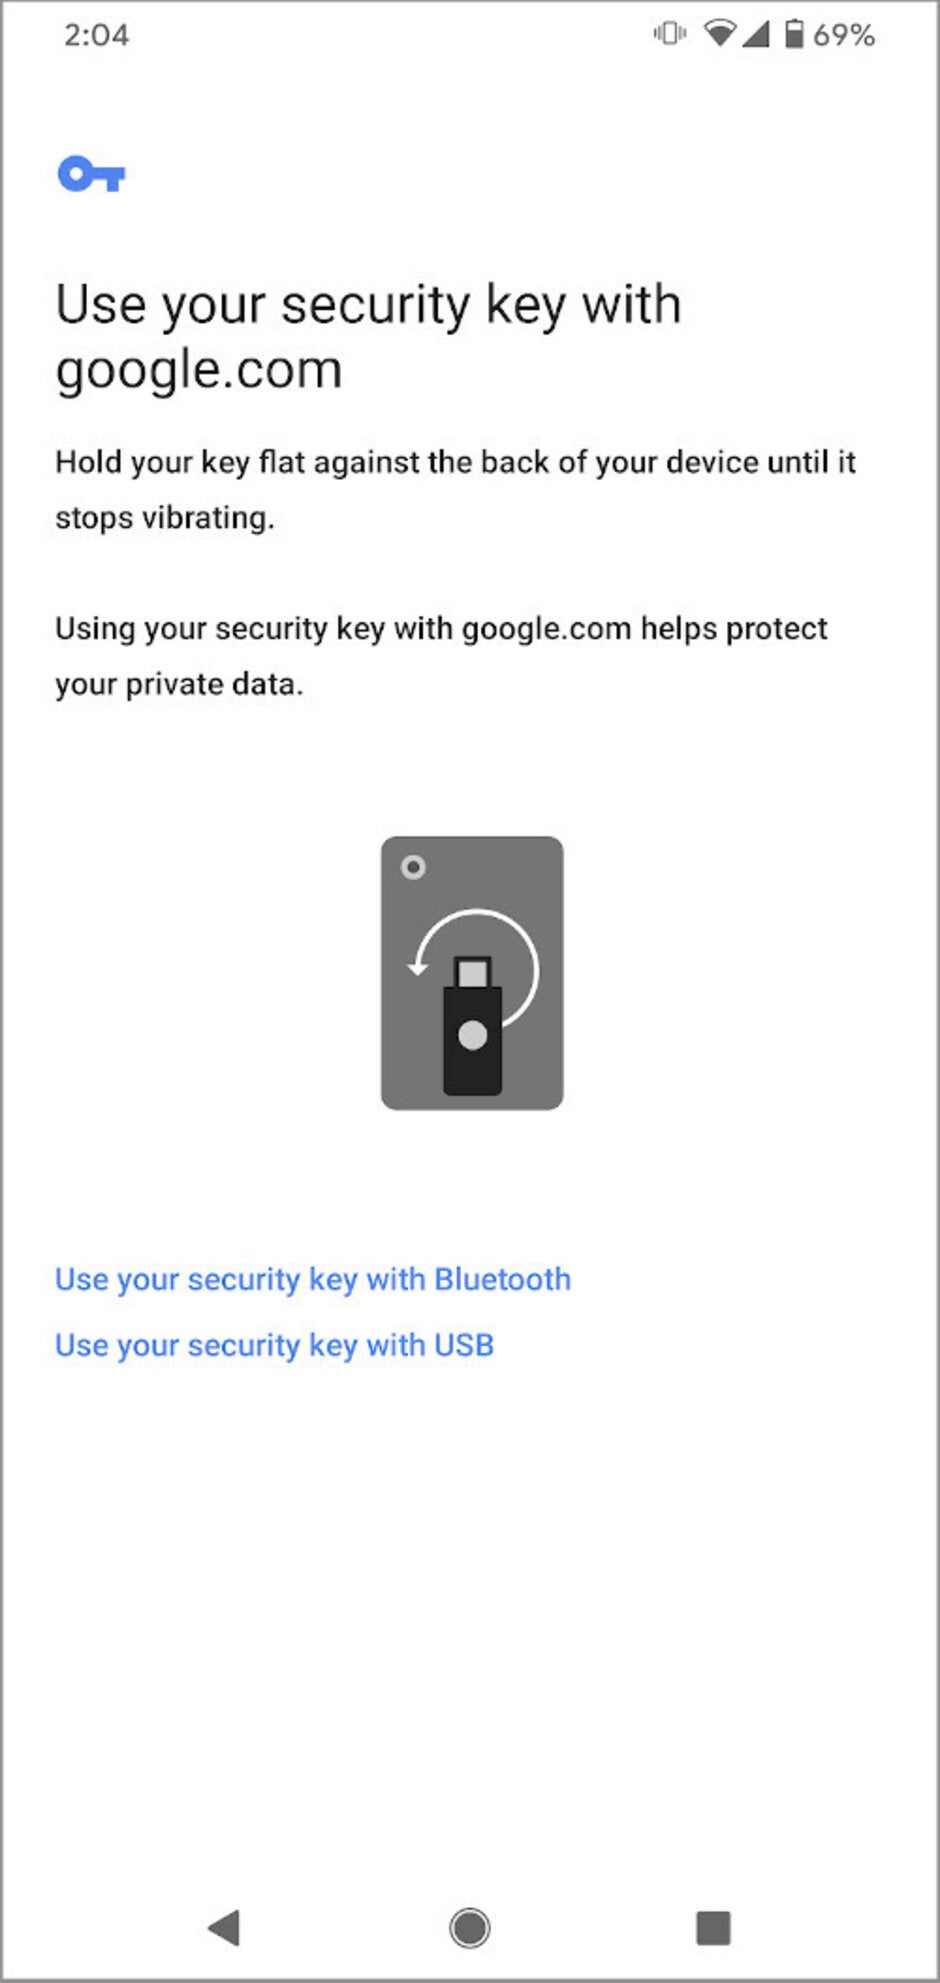 Enrolling security key on Chrome on mobile devices - Update allows enrolling Google security keys on more devices